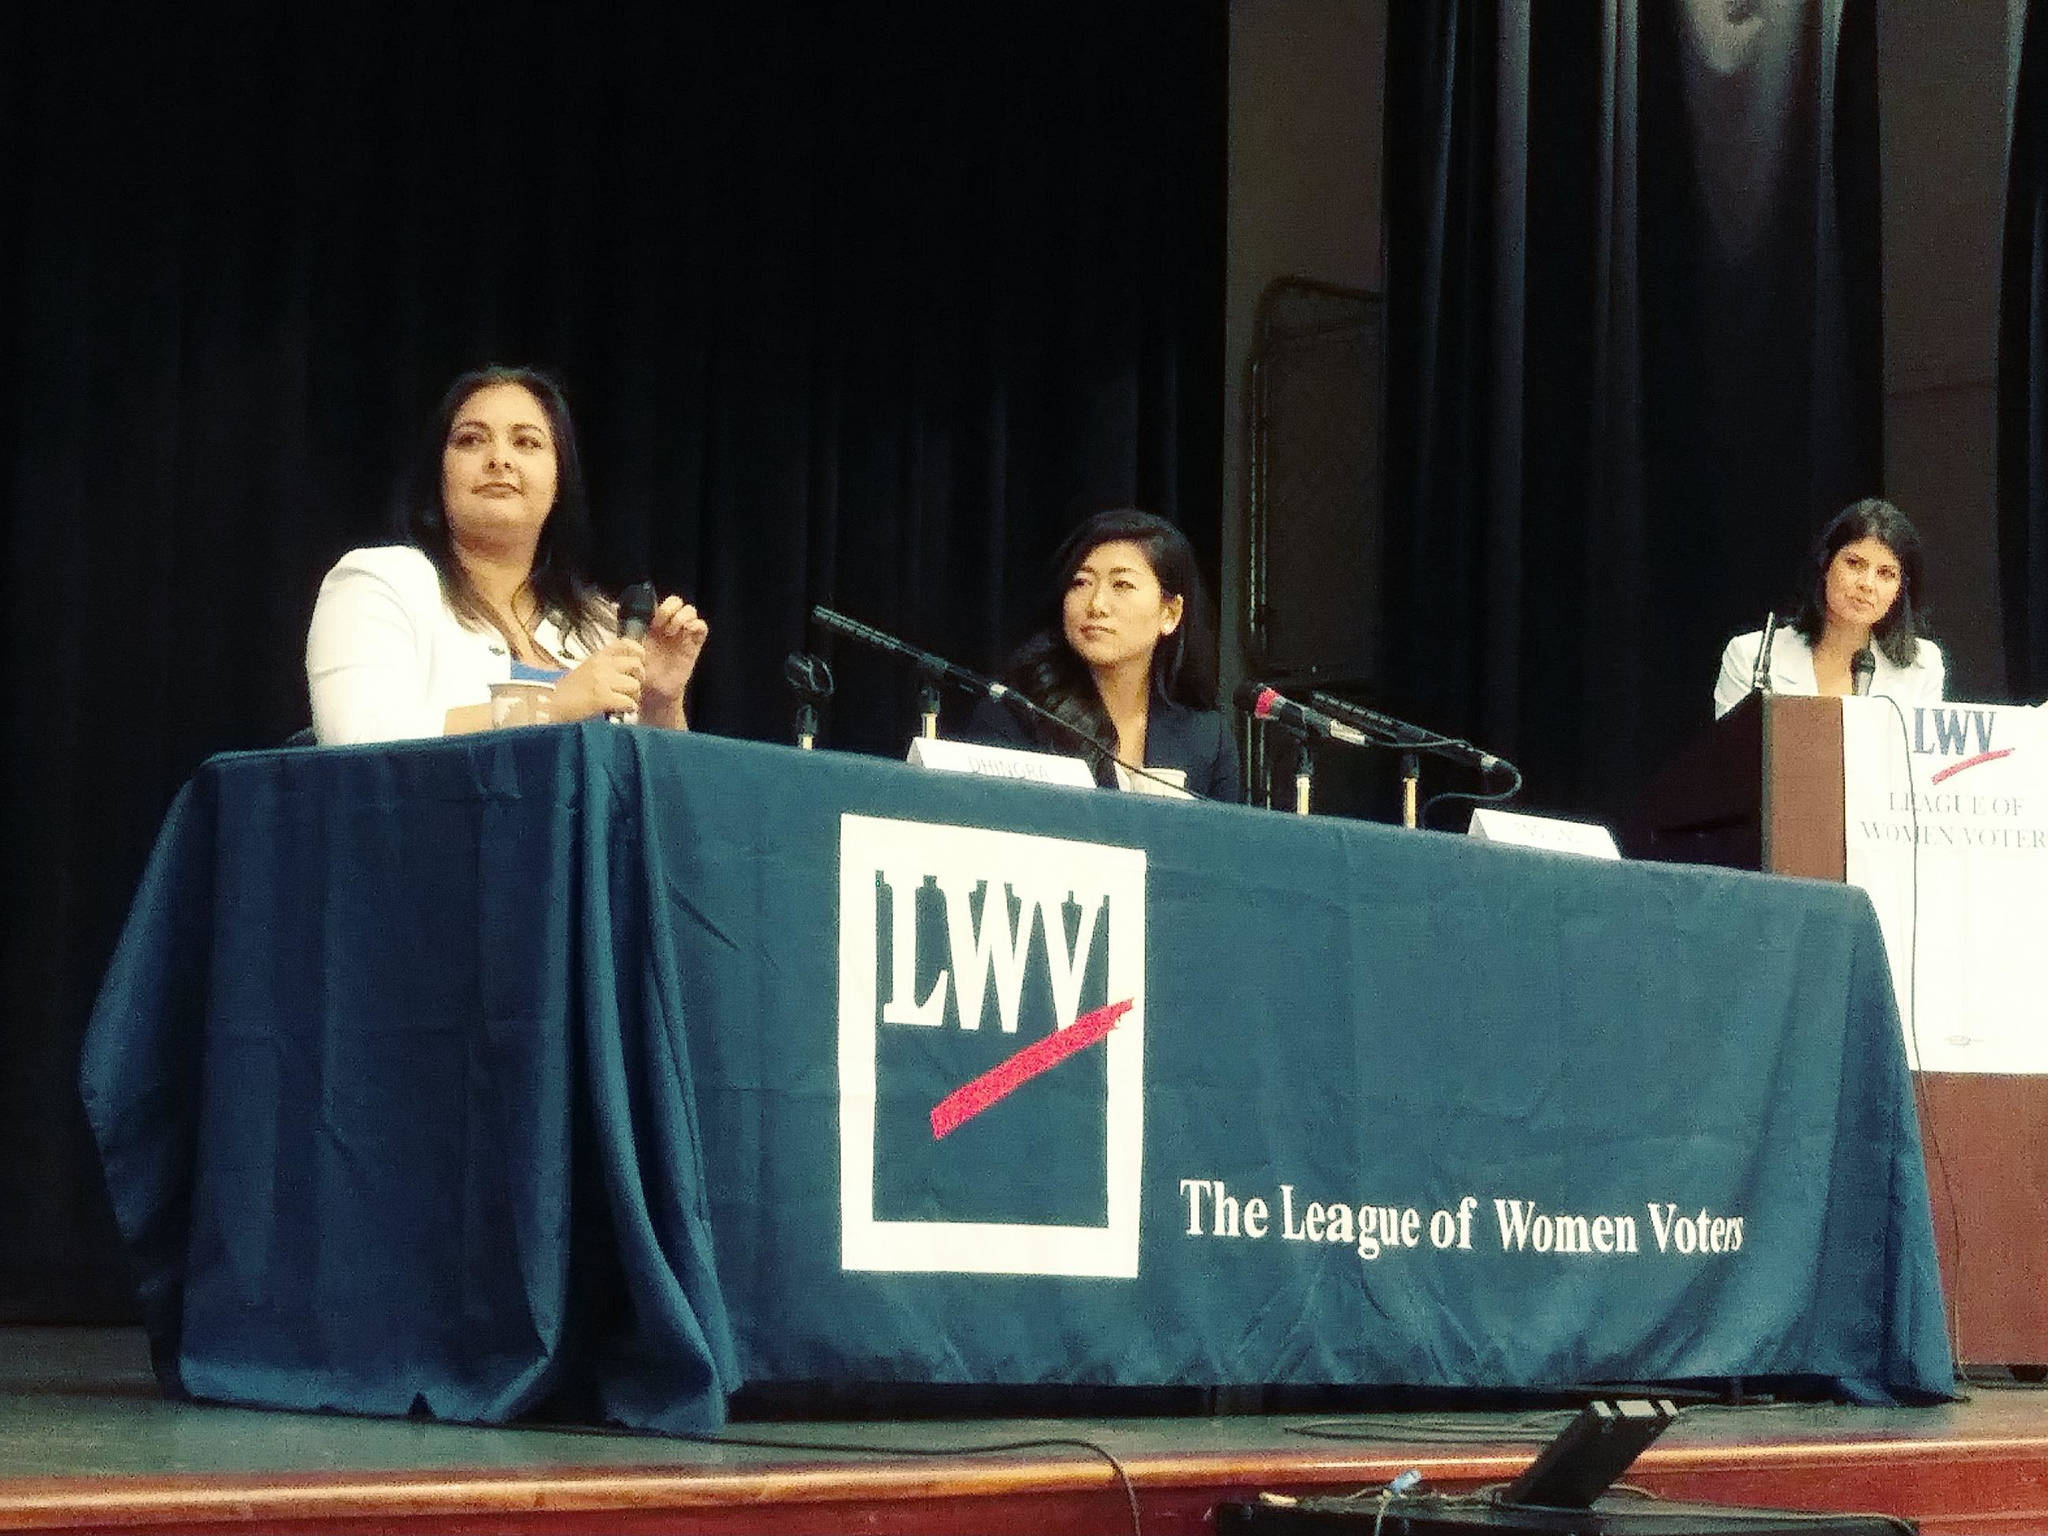 State Senate candidates Manka Dhingra, left, and Jinyoung Englund, center, at a League of Women Voters debate in Redmond in September. Aaron Kunkler/Redmond Reporter